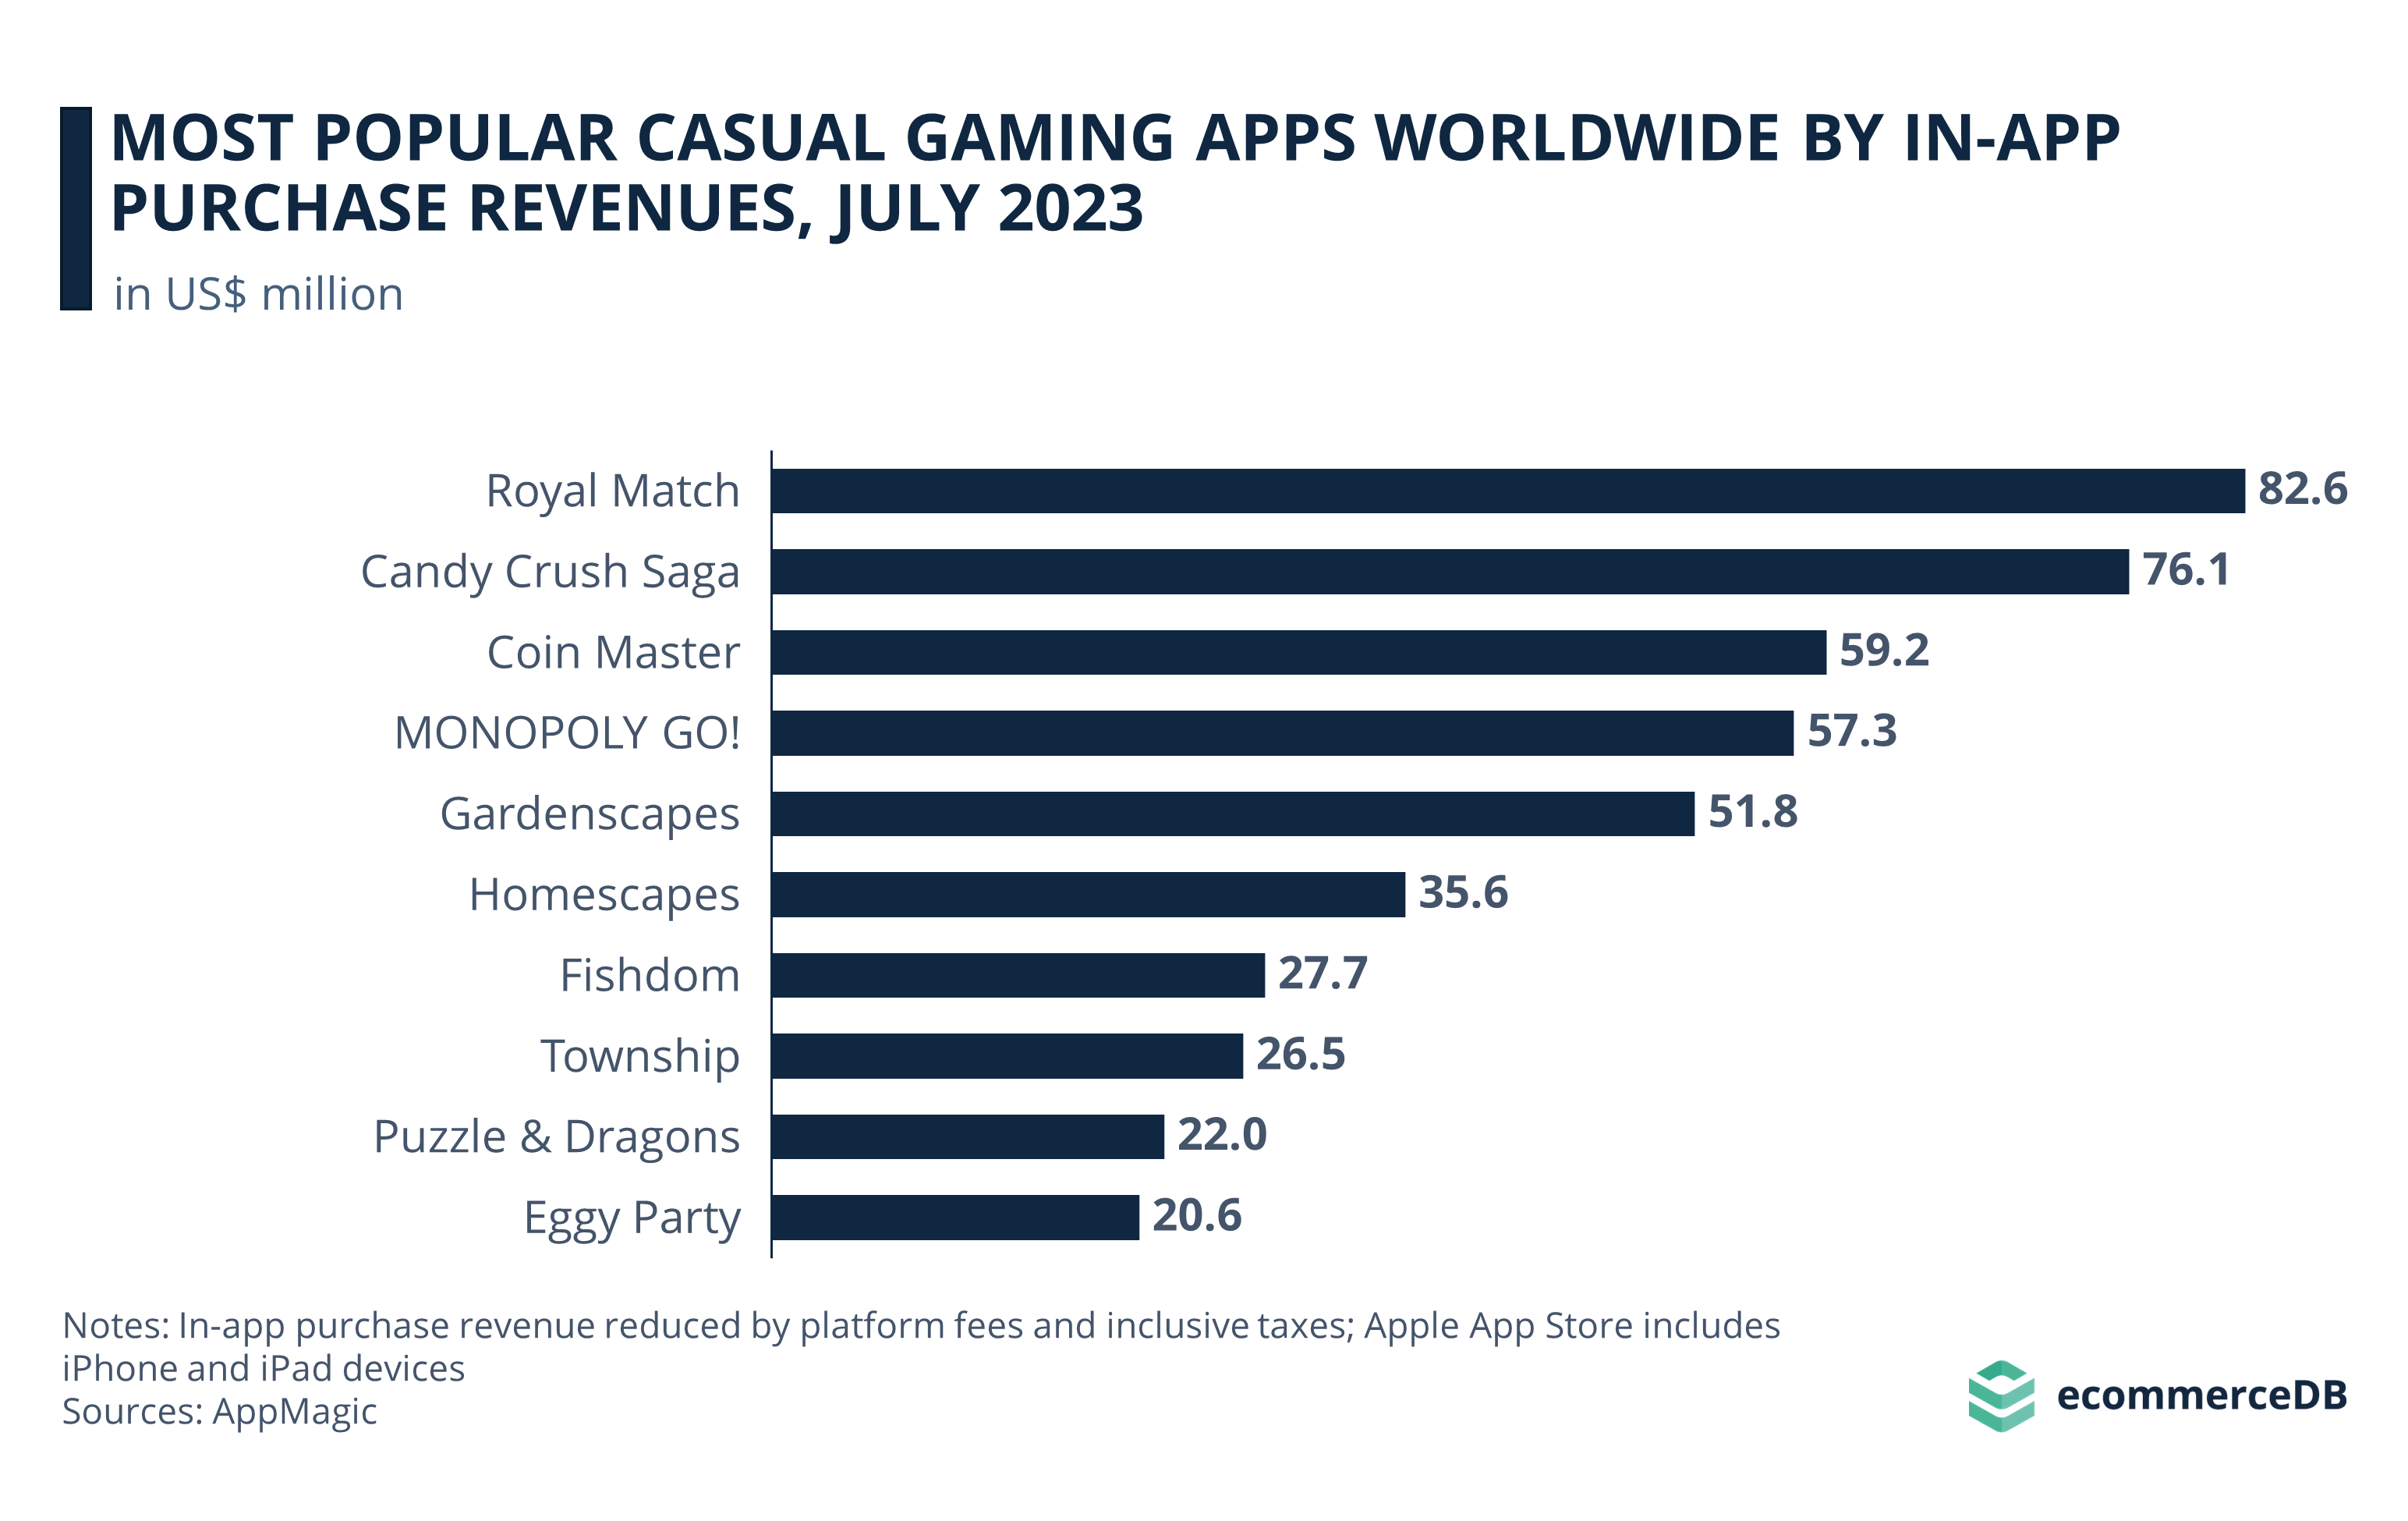 Most Popular Casual Gaming Apps Worldwide by In-App Purchase Revenues, July 2023